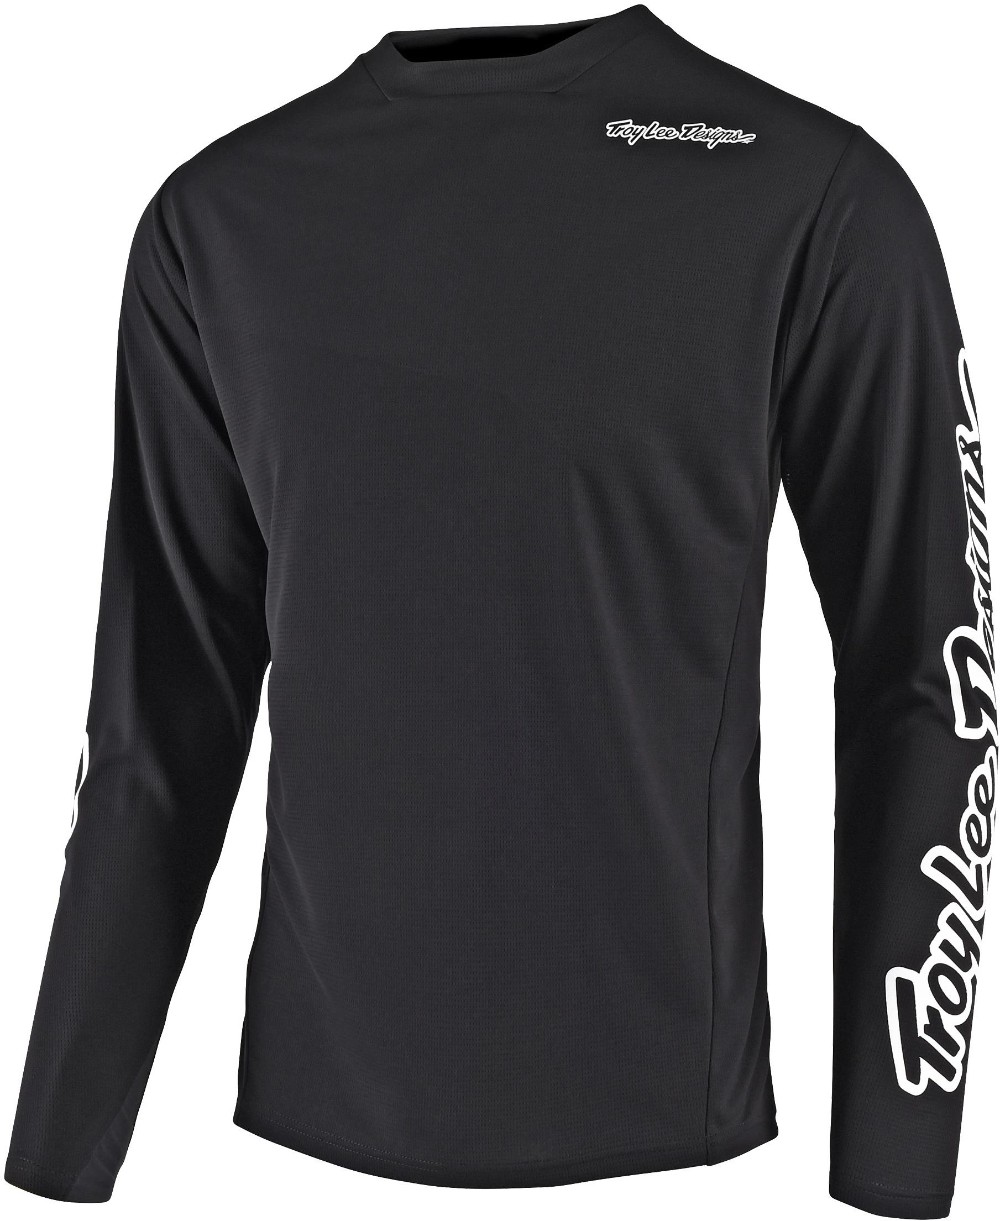 Sprint Youth Long Sleeve MTB Cycling Jersey image 0